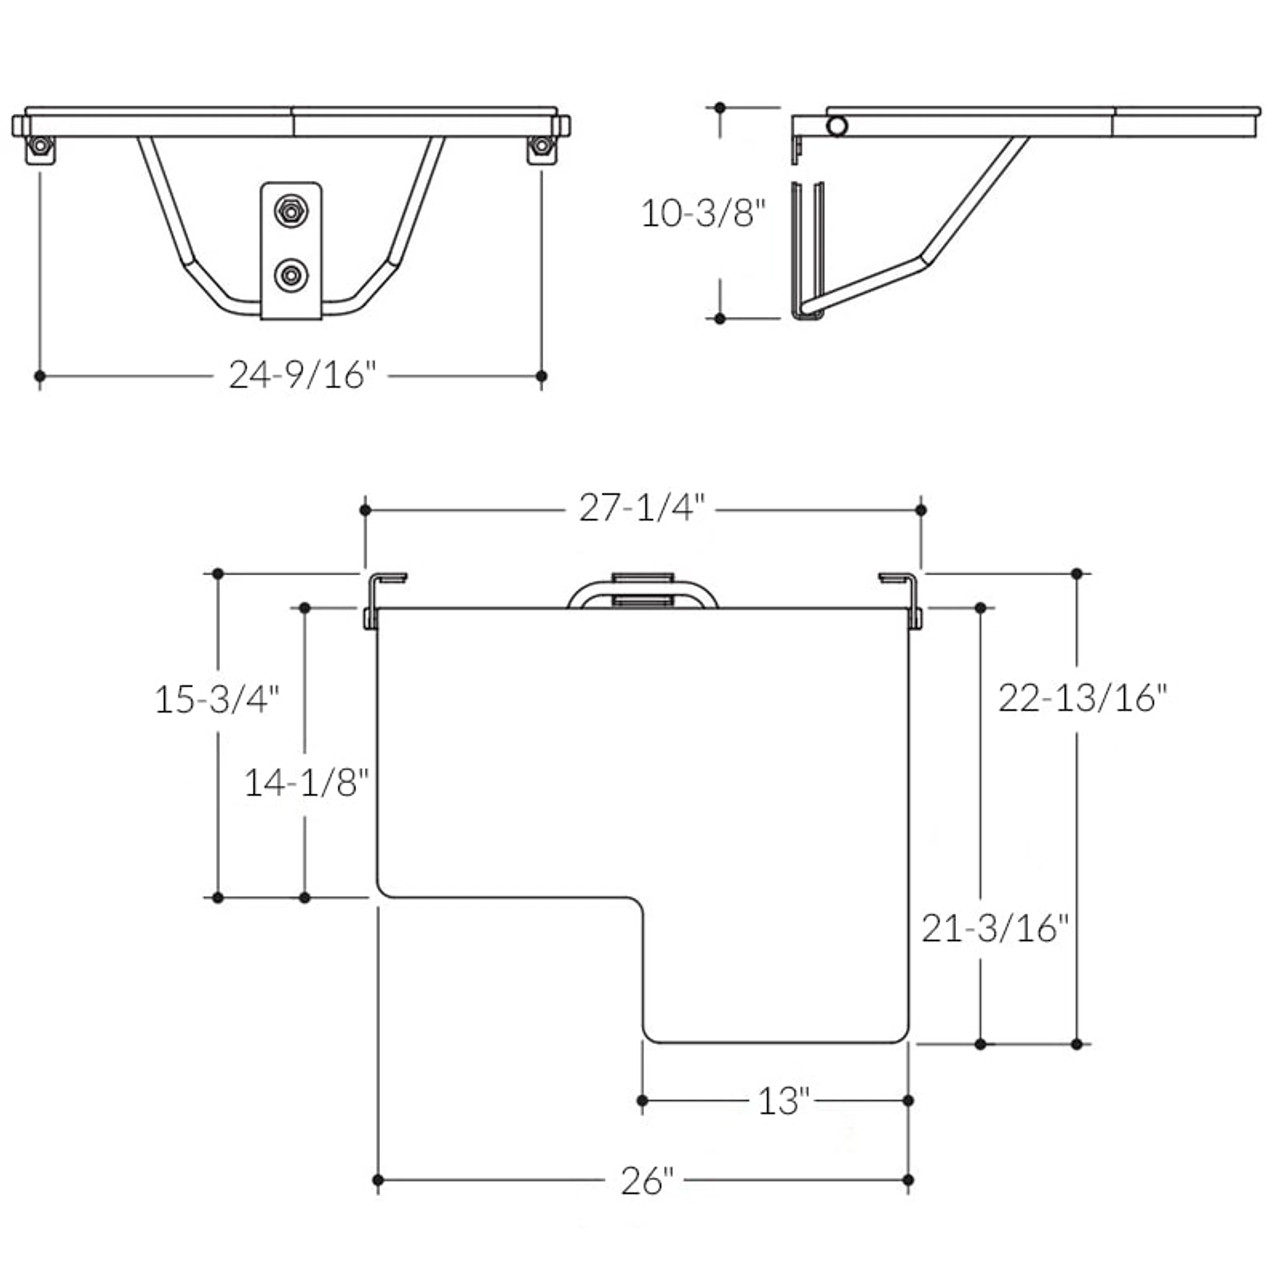 HEWI Stainless Steel Fold Up Shower Seat 26" L Shaped - Series 900 - Spec Sheet